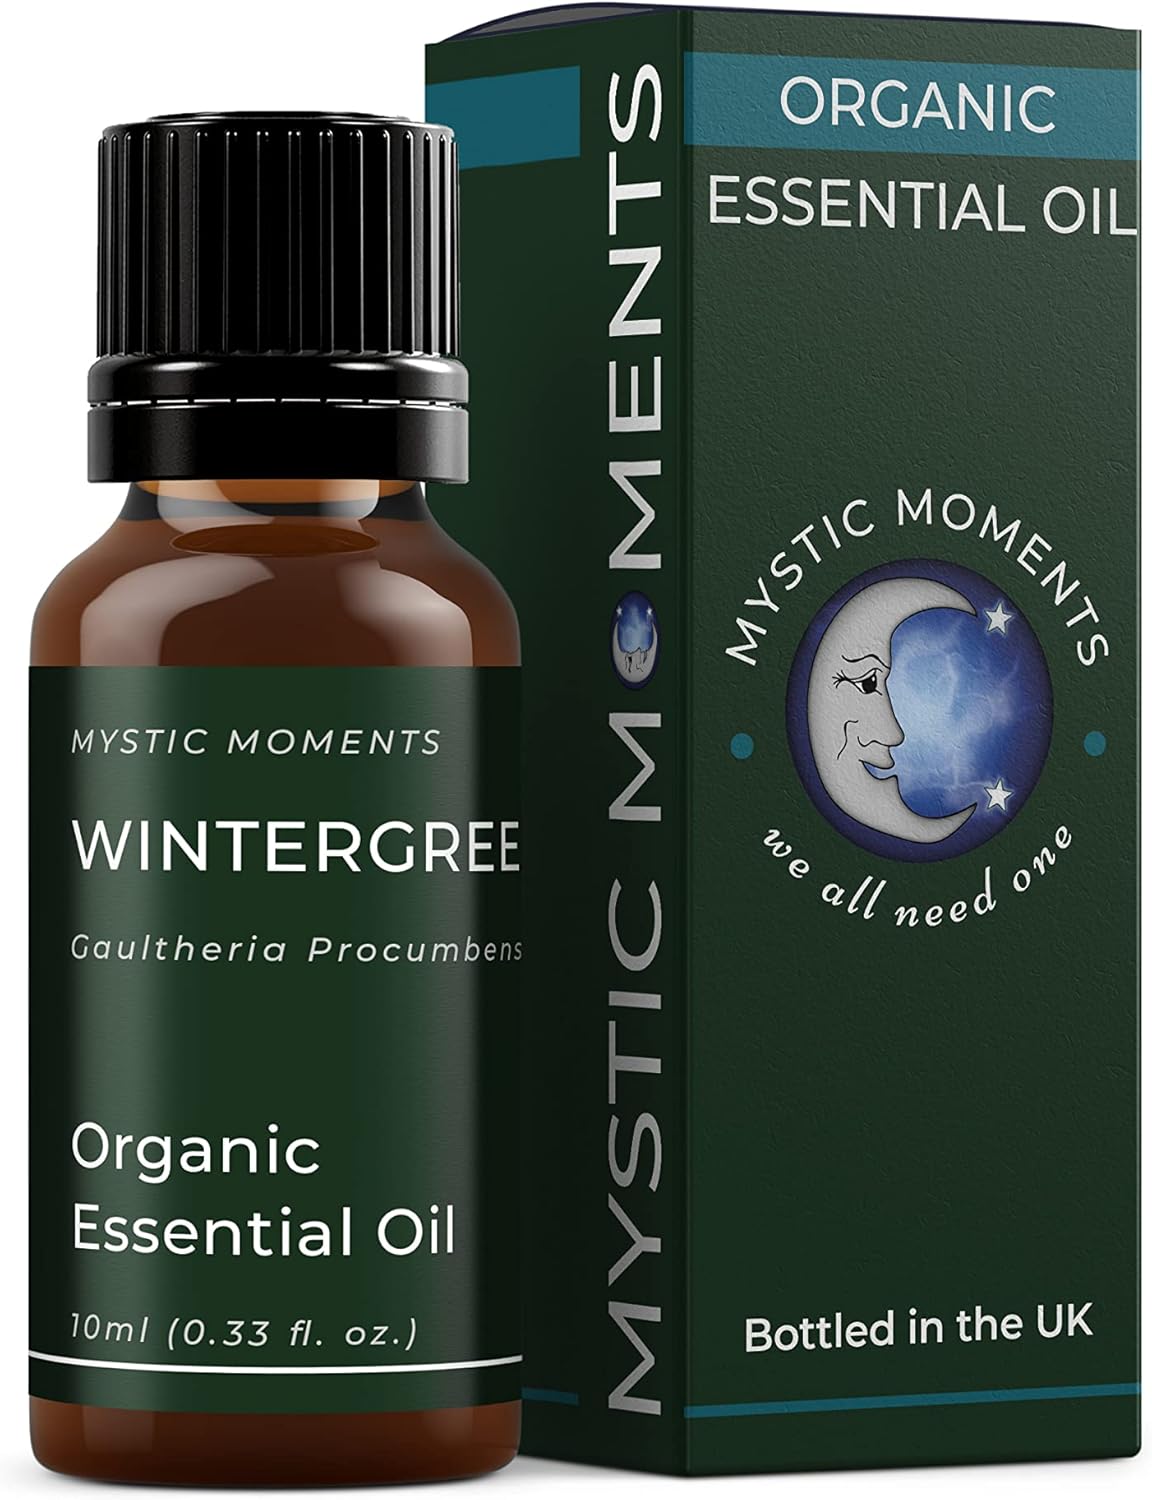 Mystic Moments | Organic Wintergreen Essential Oil 10ml - Pure & Natural oil for Diffusers, Aromatherapy & Massage Blends Vegan GMO Free